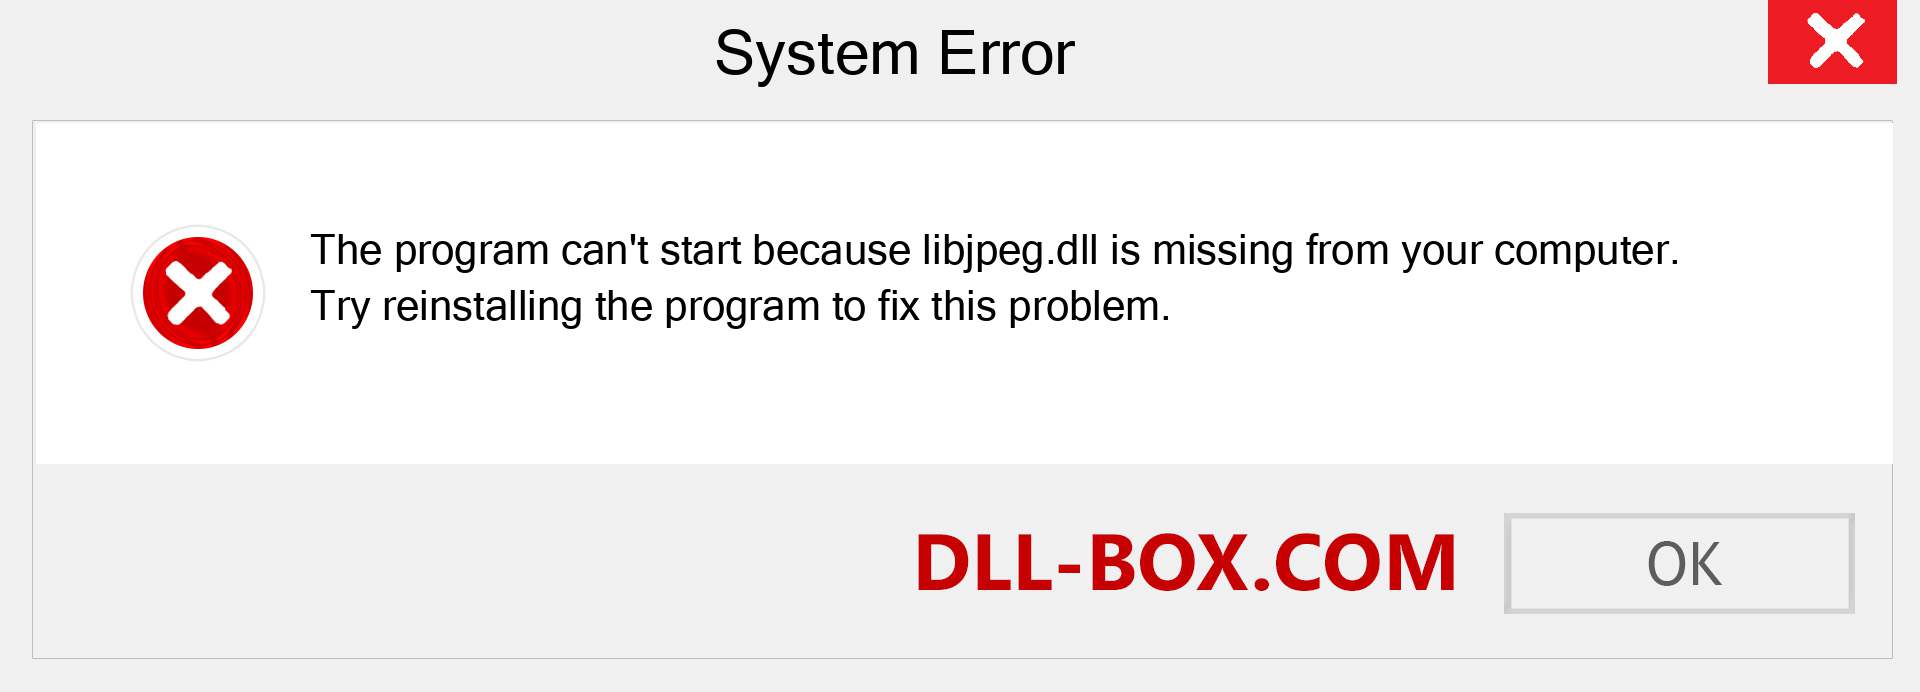  libjpeg.dll file is missing?. Download for Windows 7, 8, 10 - Fix  libjpeg dll Missing Error on Windows, photos, images